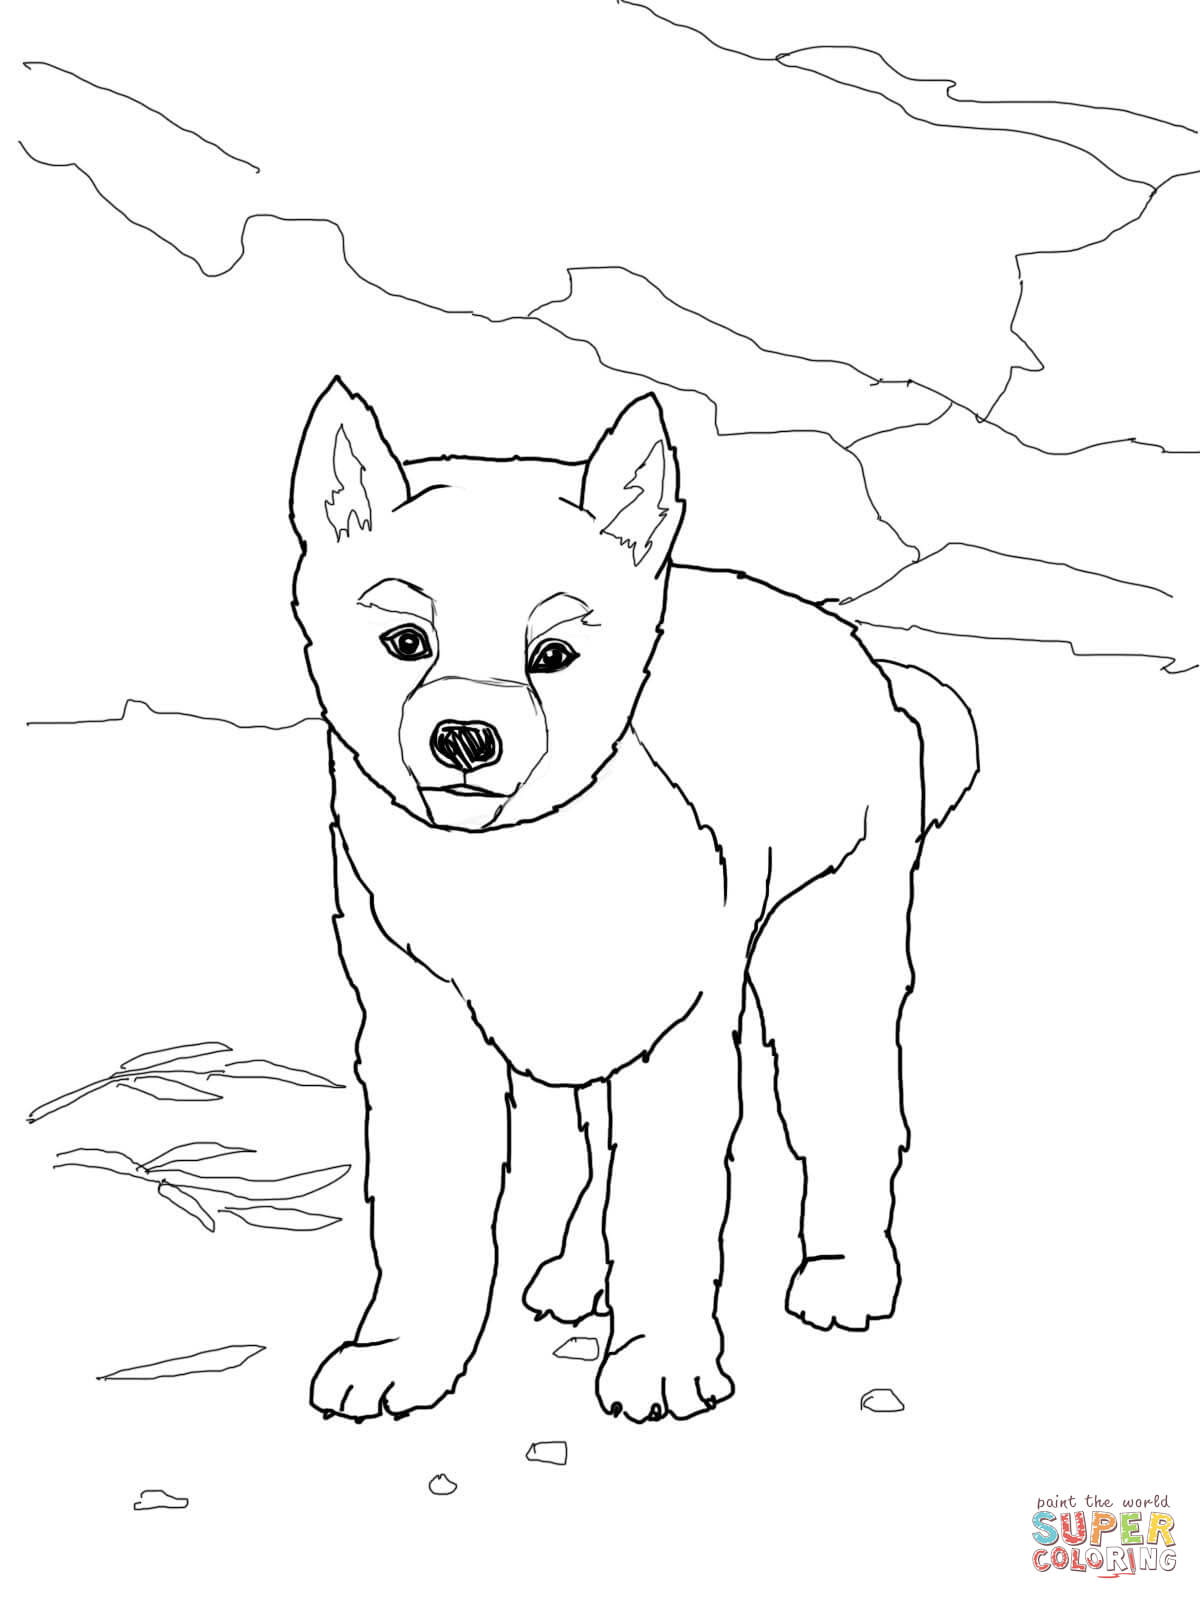 Dingo puppy coloring page free printable coloring pages